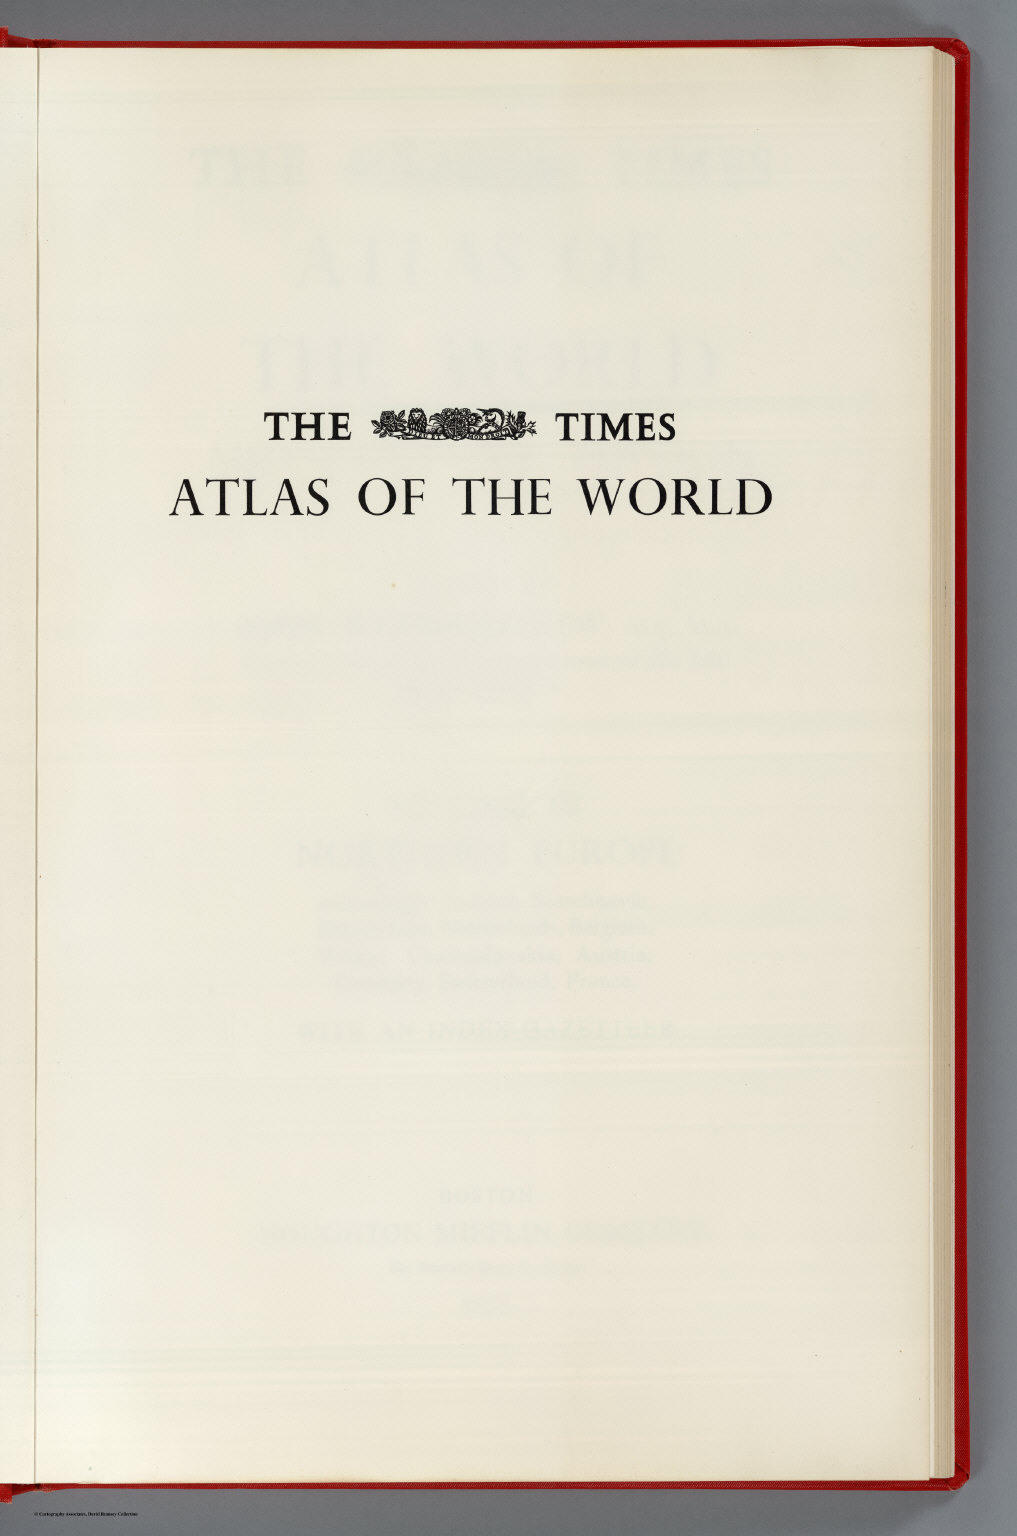 half-title-the-times-atlas-of-the-world-mid-century-edition-v-iii